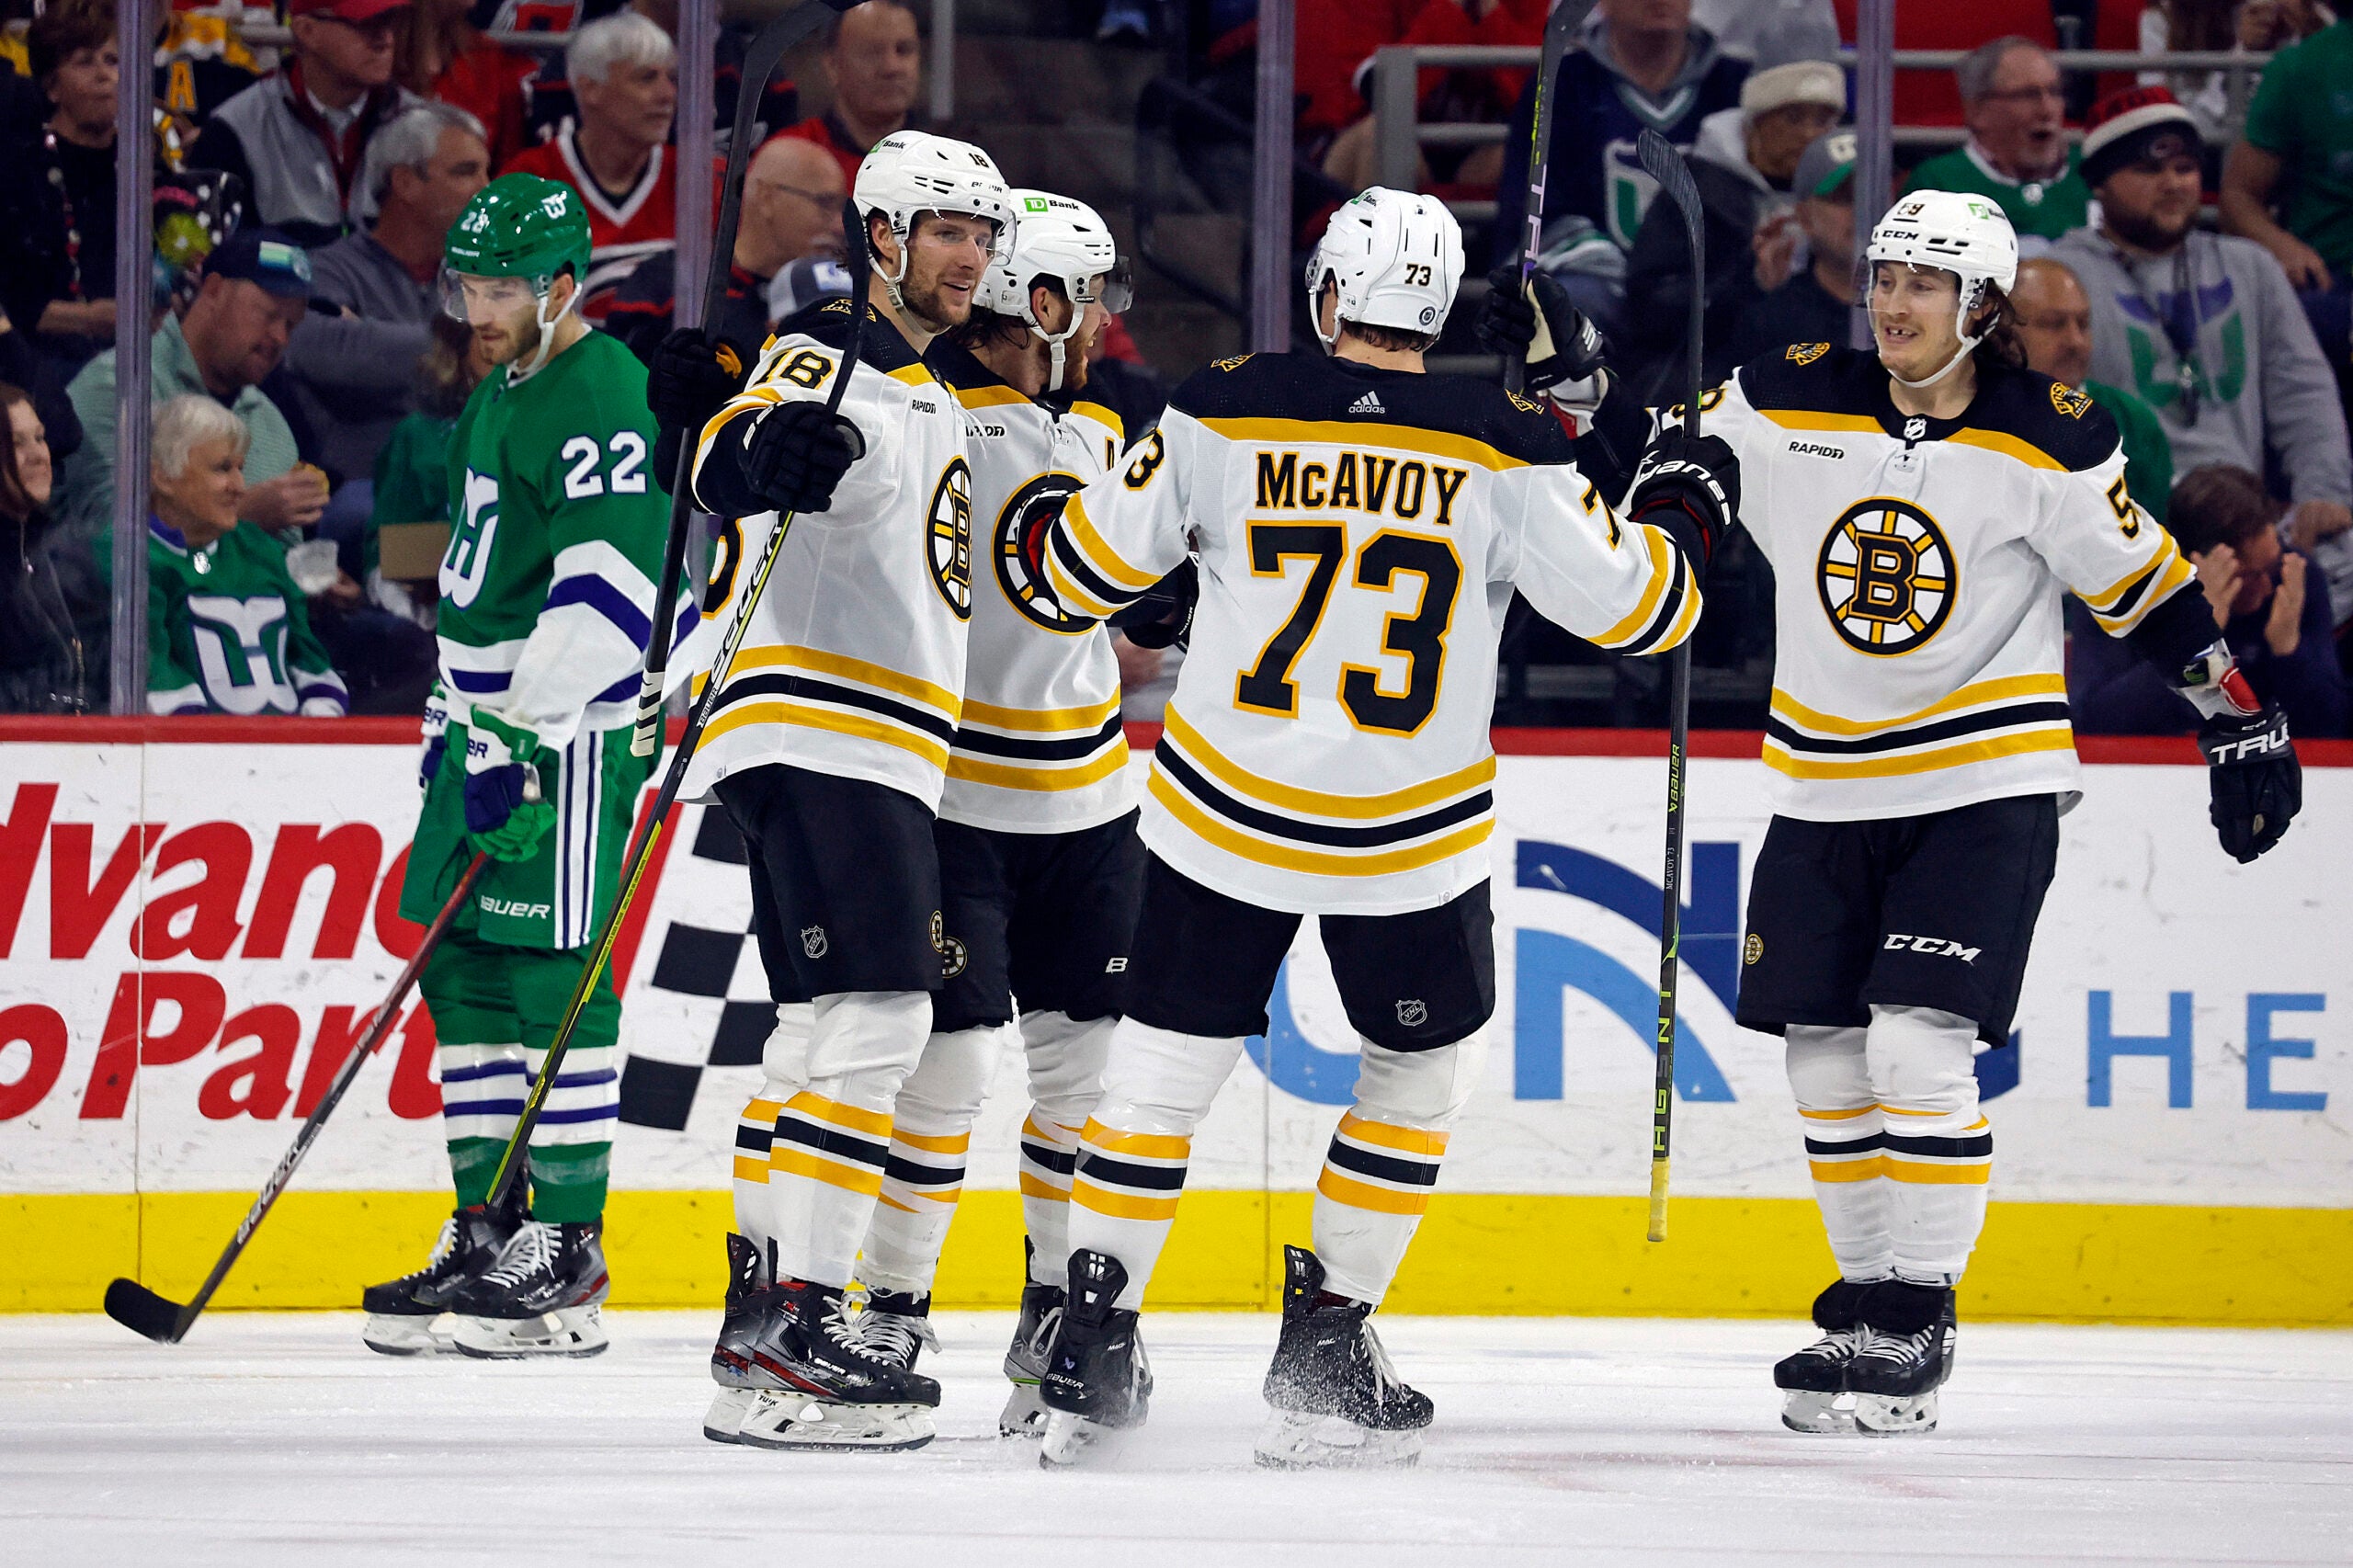 Boston Bruins Pavel Zacha, Charlie McAvoy (73) and Tyler Bertuzzi celebrate a goal with David Pastrnak, second left, as Carolina Hurricanes' Brett Pesce (22) skates nearby during the second period of an NHL hockey game in Raleigh, N.C., Sunday, March 26, 2023.